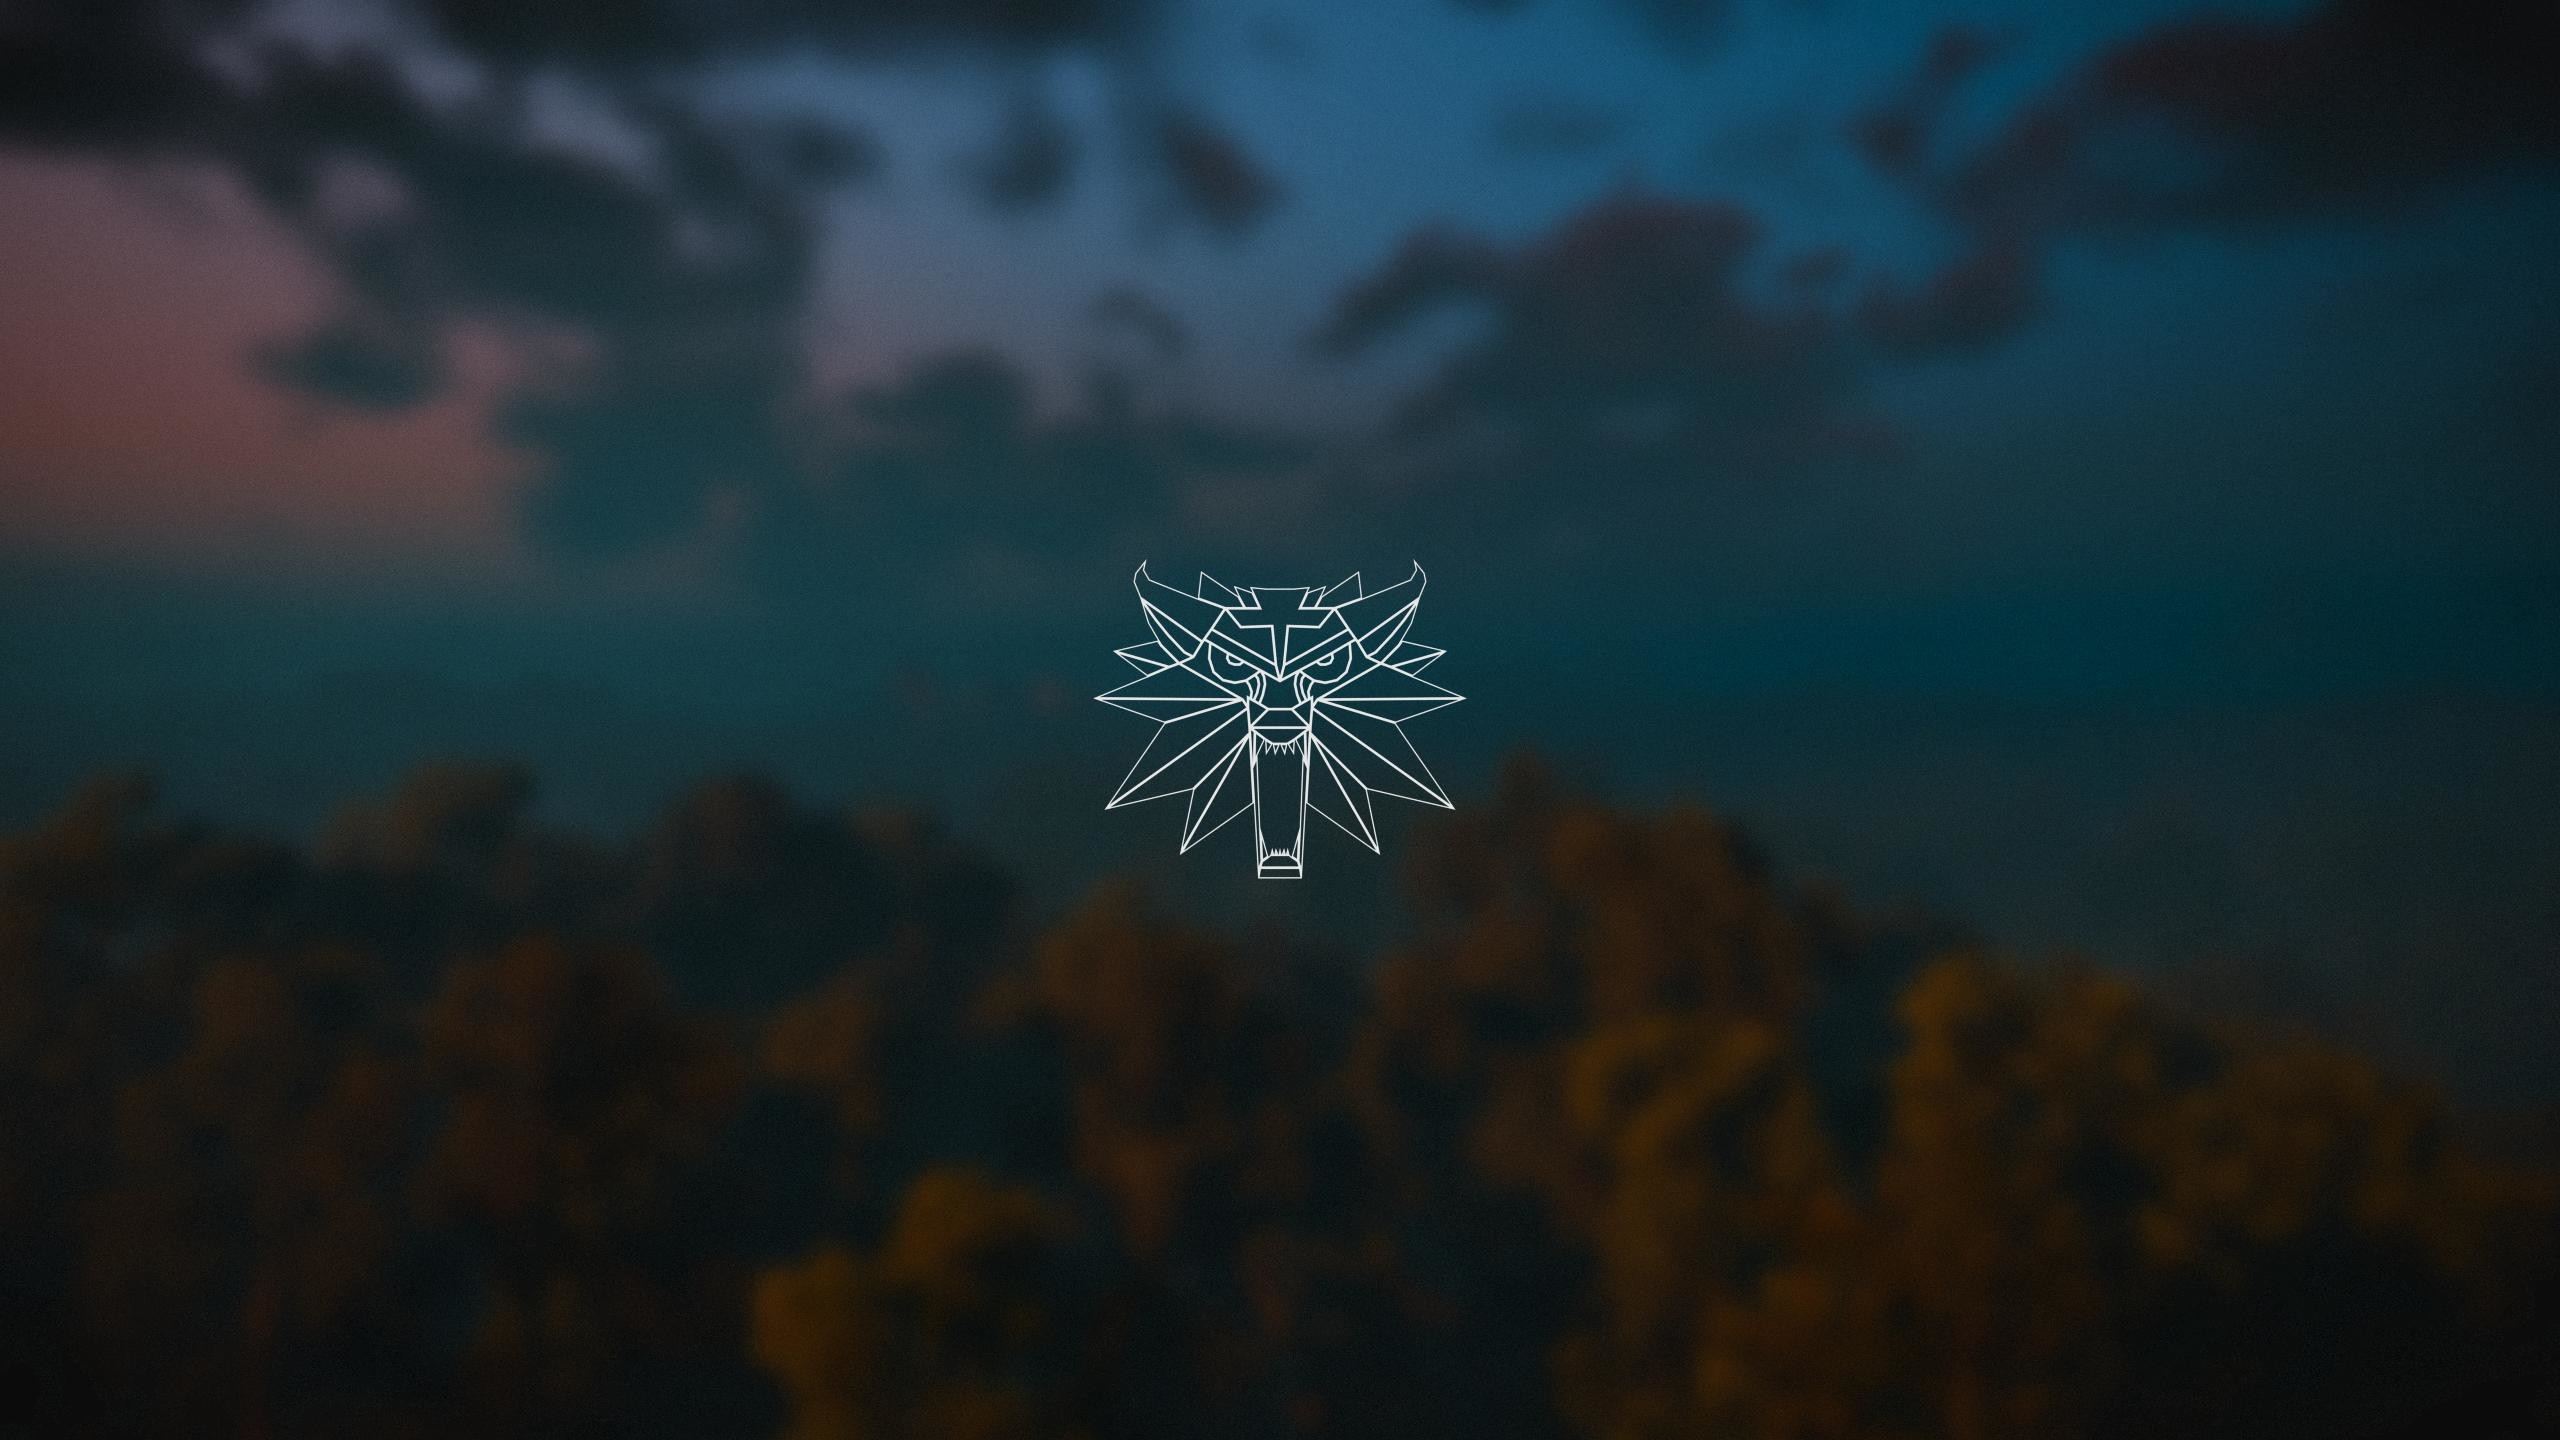 2560x1440, The Witcher 3 Minimalist Wallpapers High - Minimalist Wallpaper Hd - HD Wallpaper 